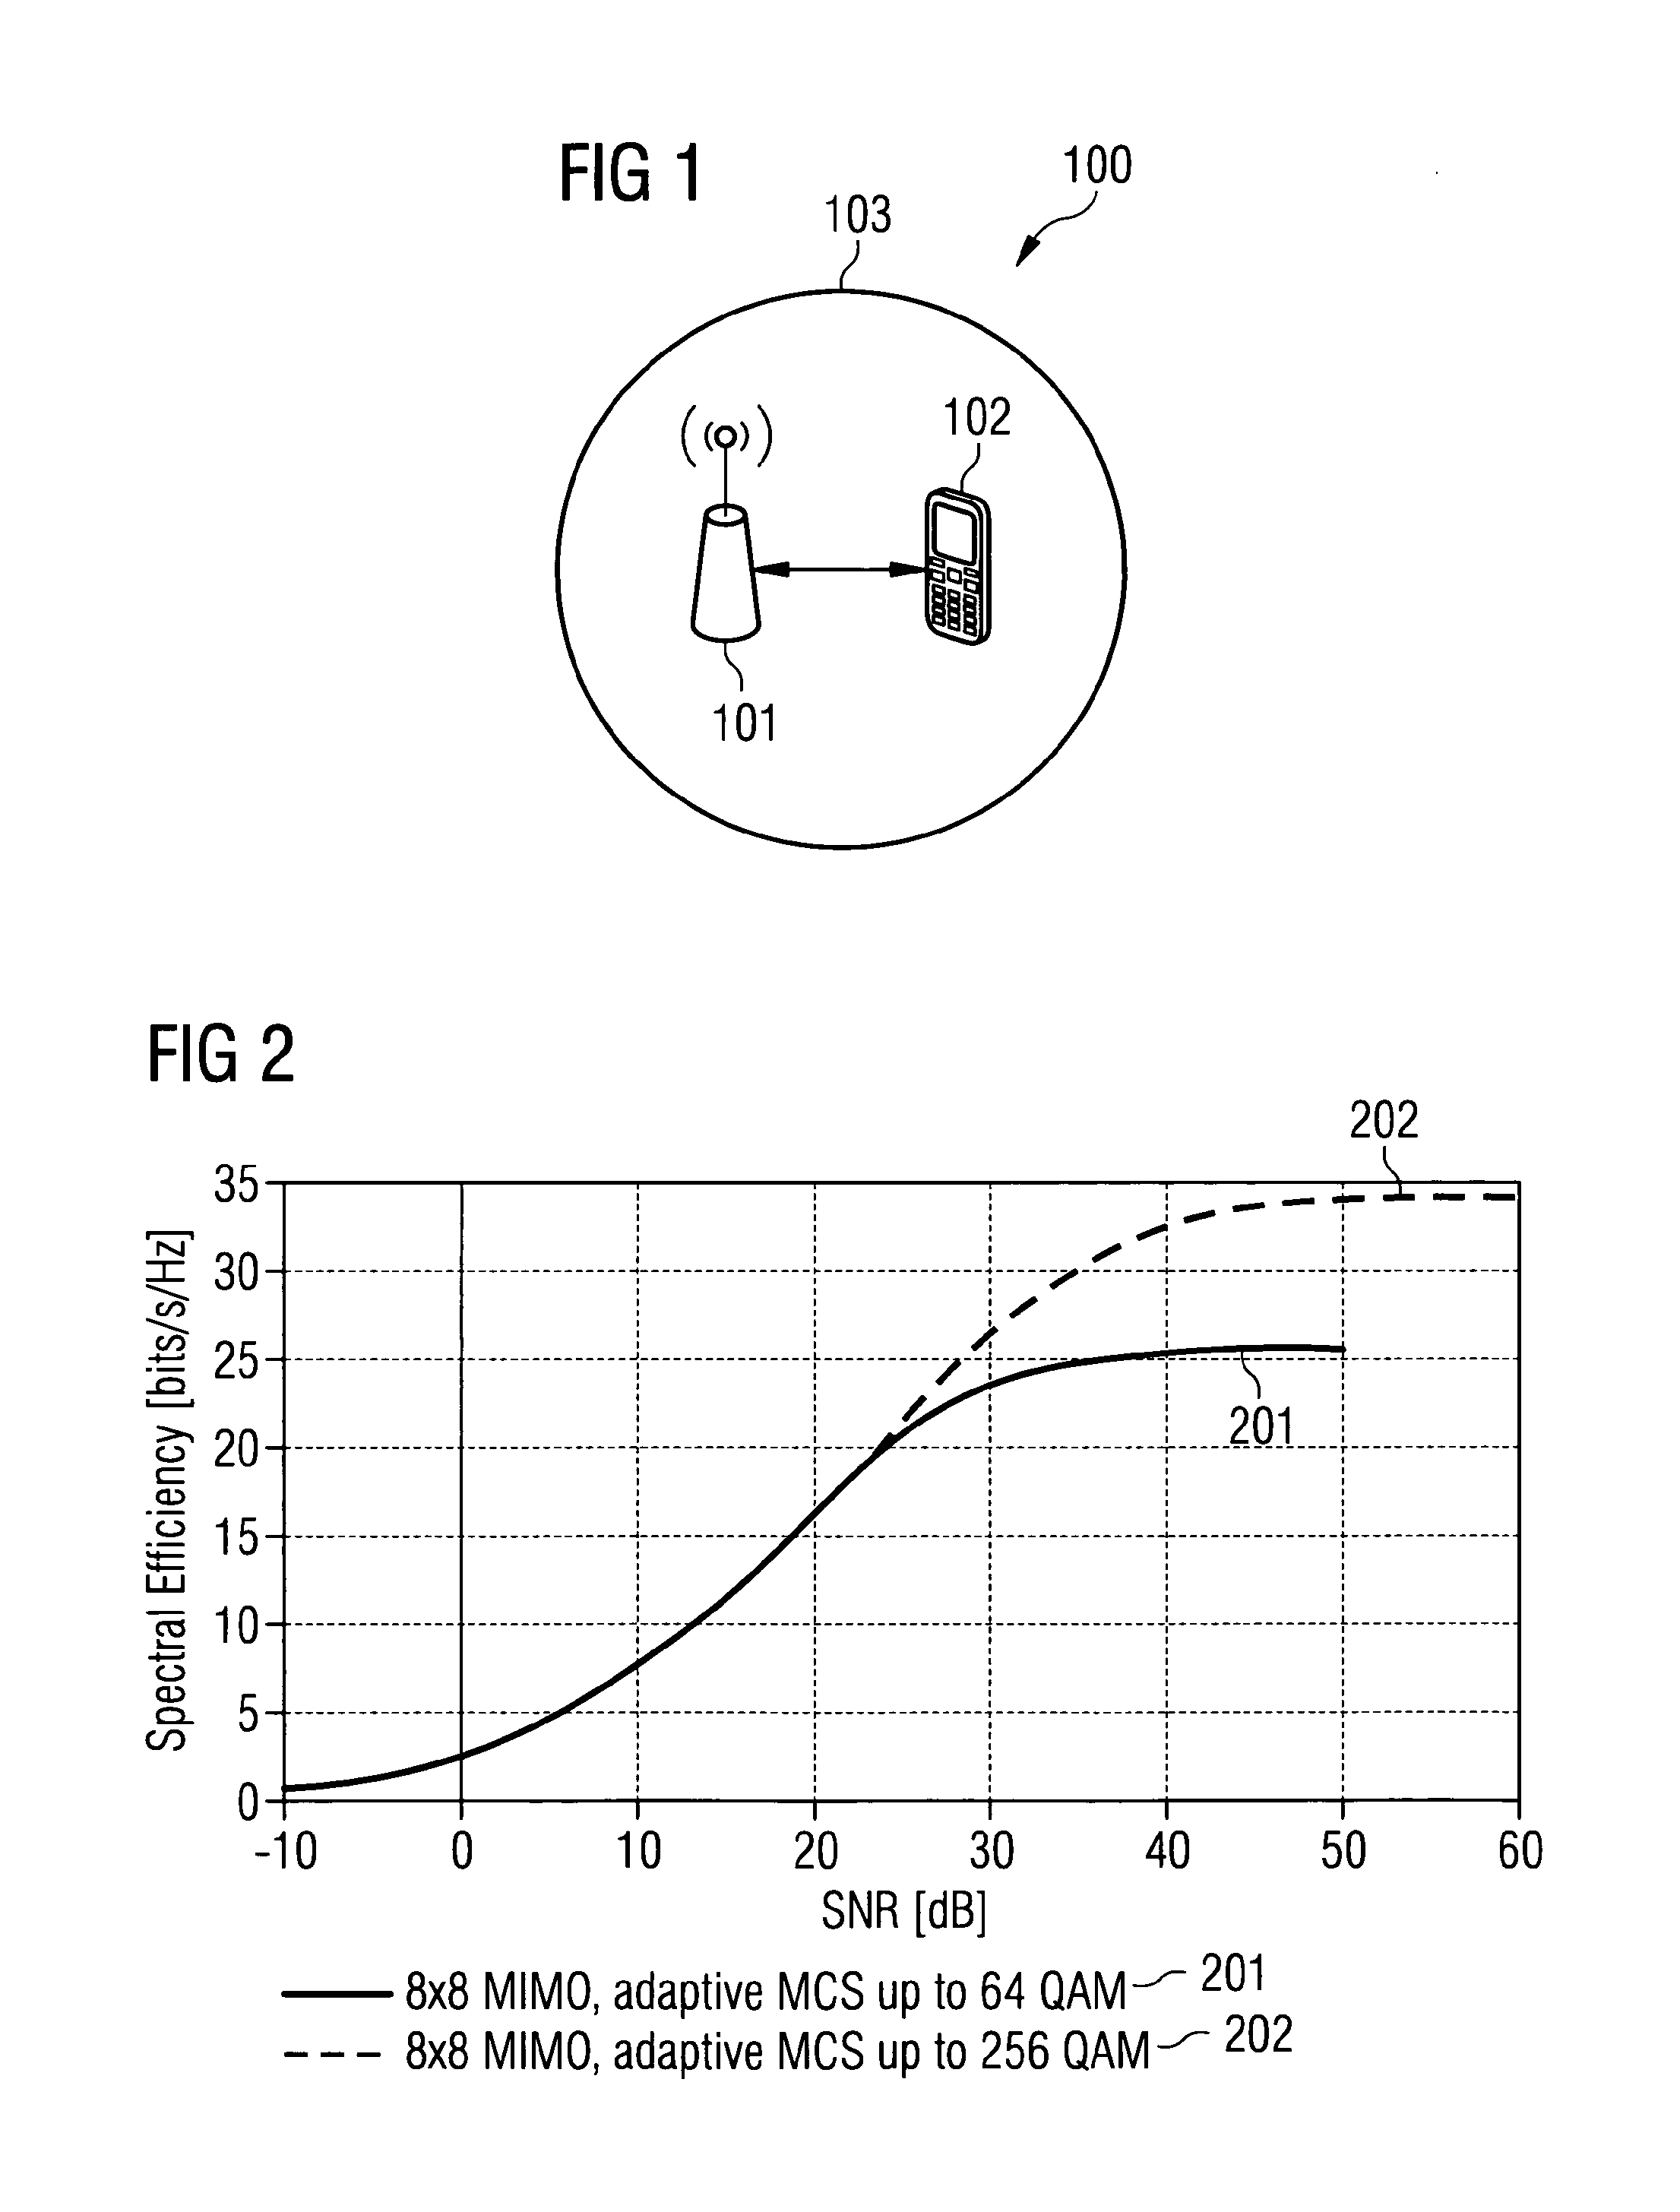 Controlling a Modulation and Coding Scheme for a Transmission Between a Base Station and a User Equipment